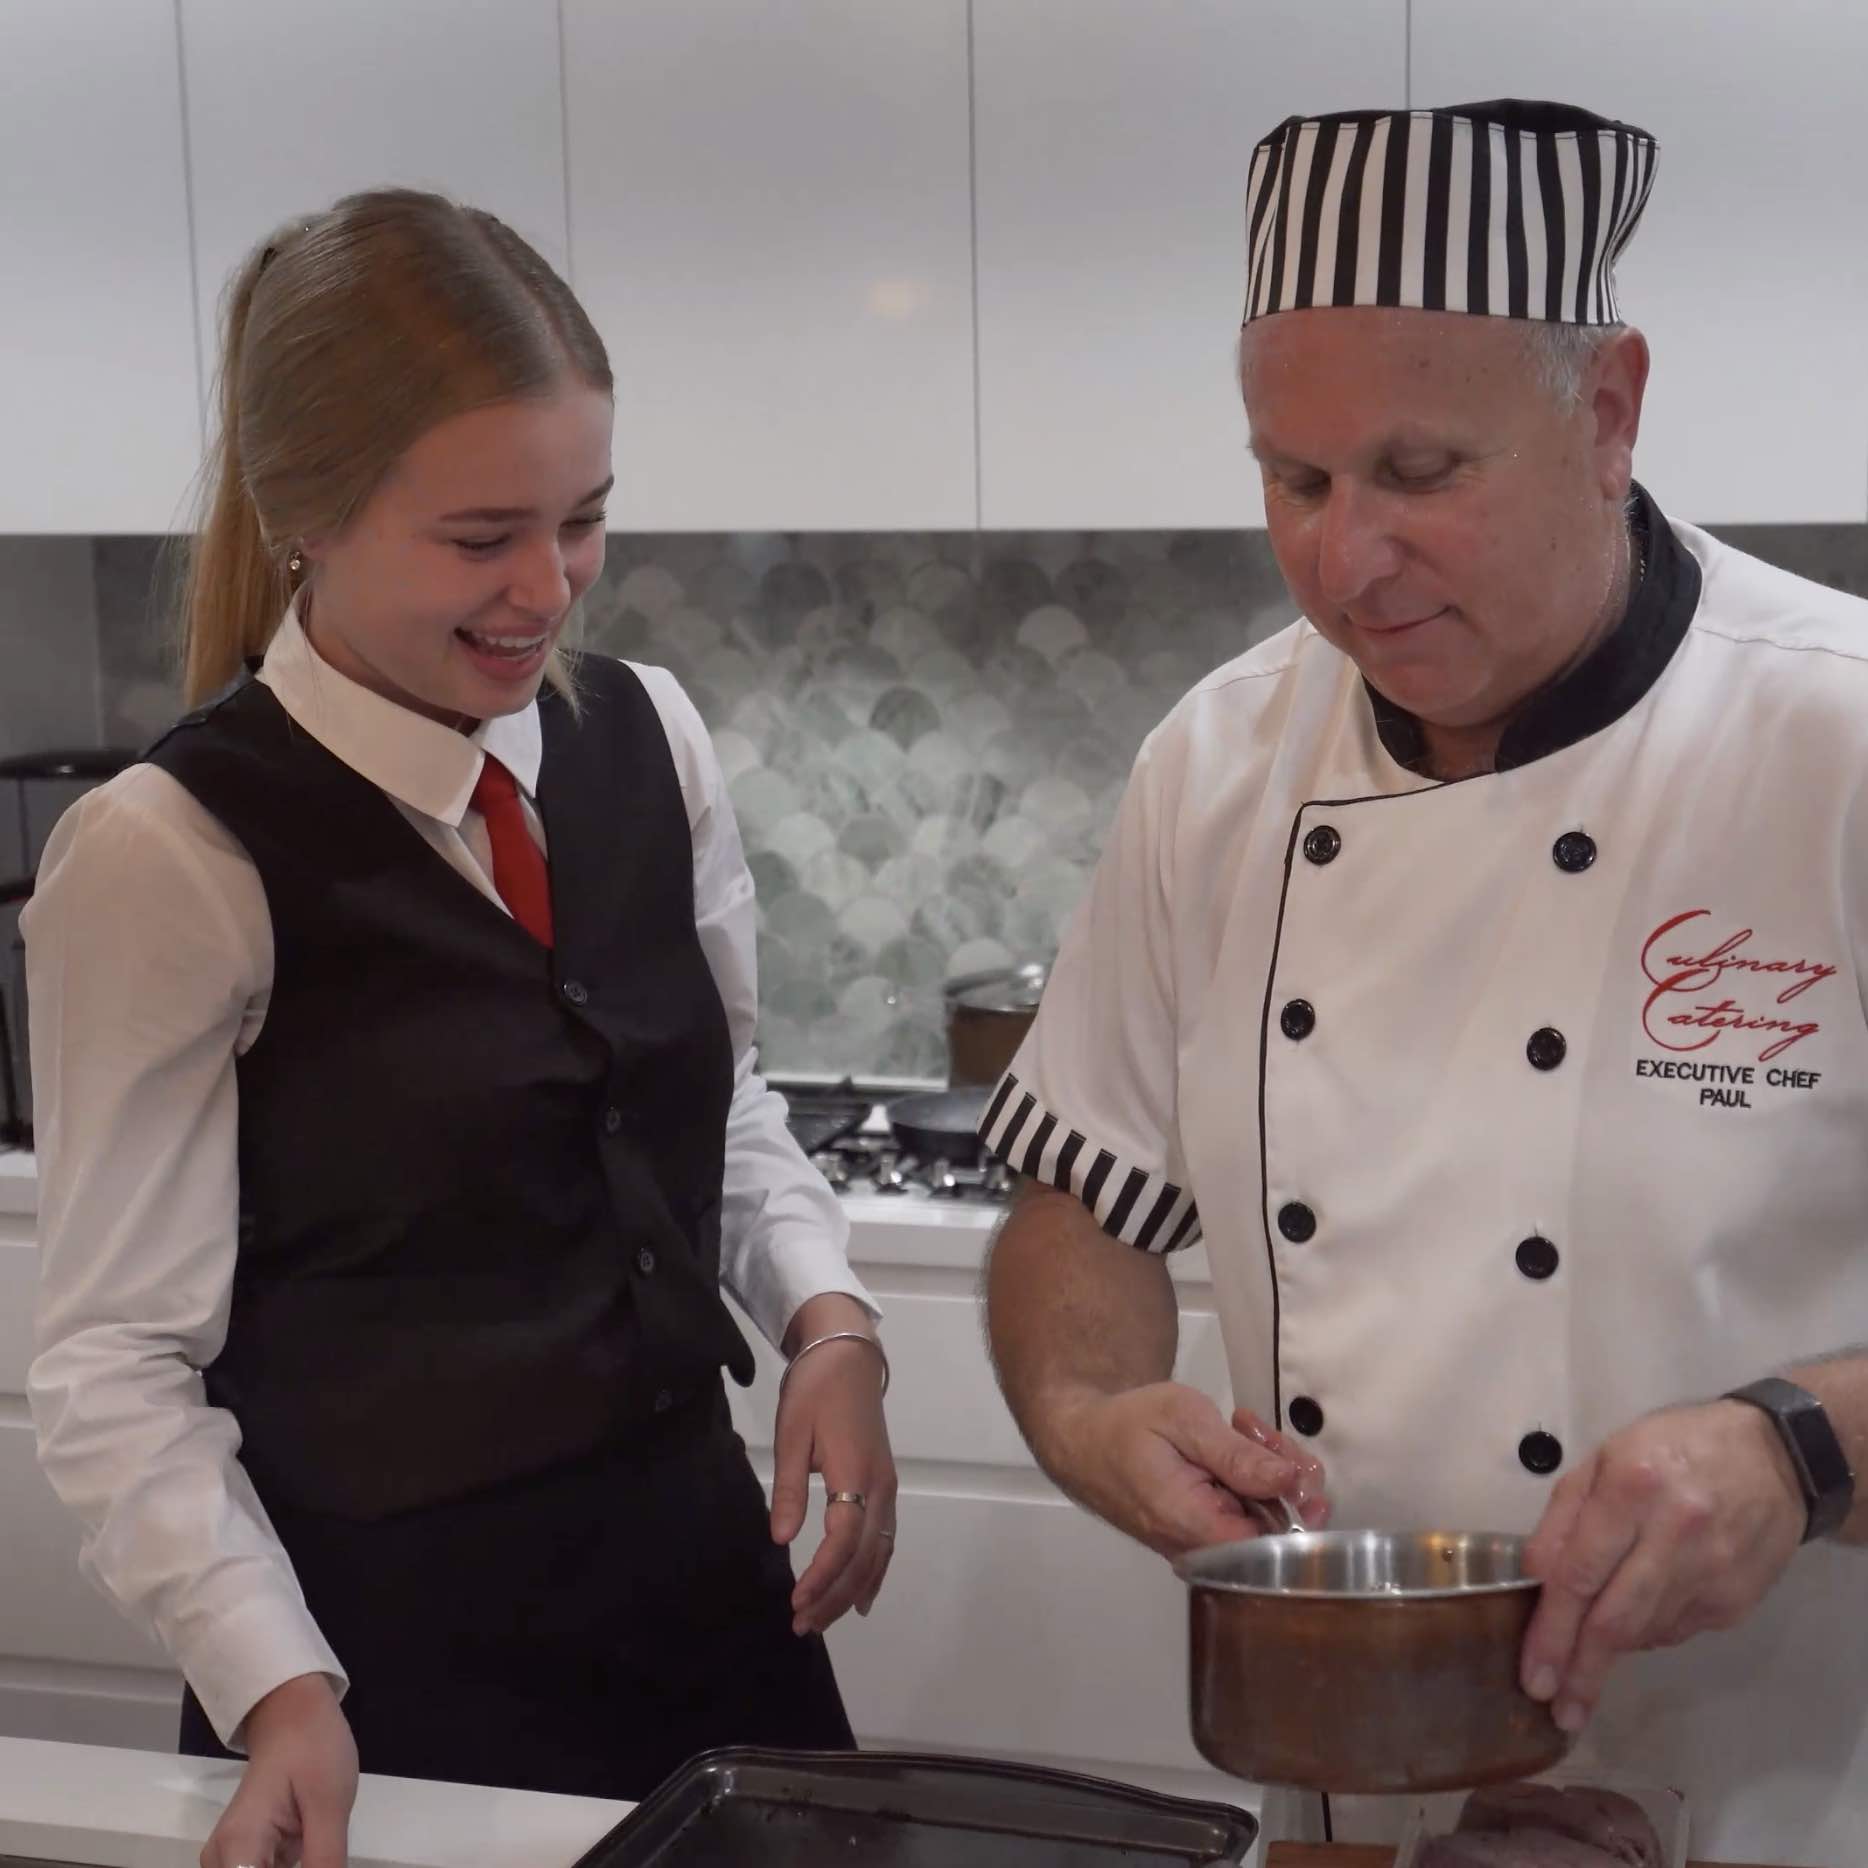 Chef and smiling waitress learning things in the kitchen